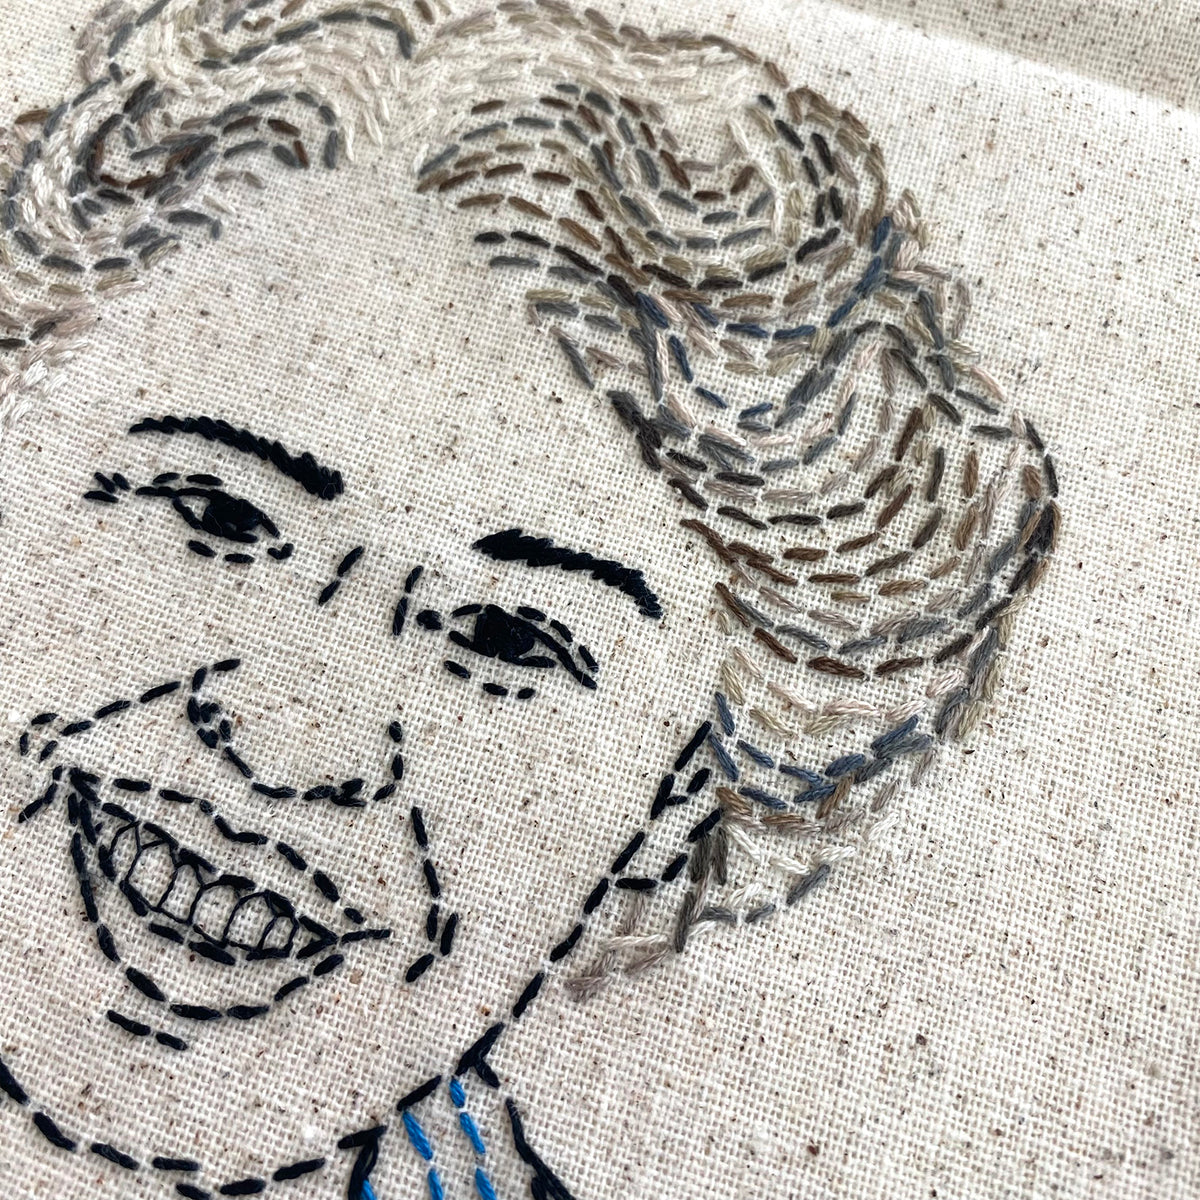 Eleanor Roosevelt Printed Fabric Pattern and PDF Embroidery Download